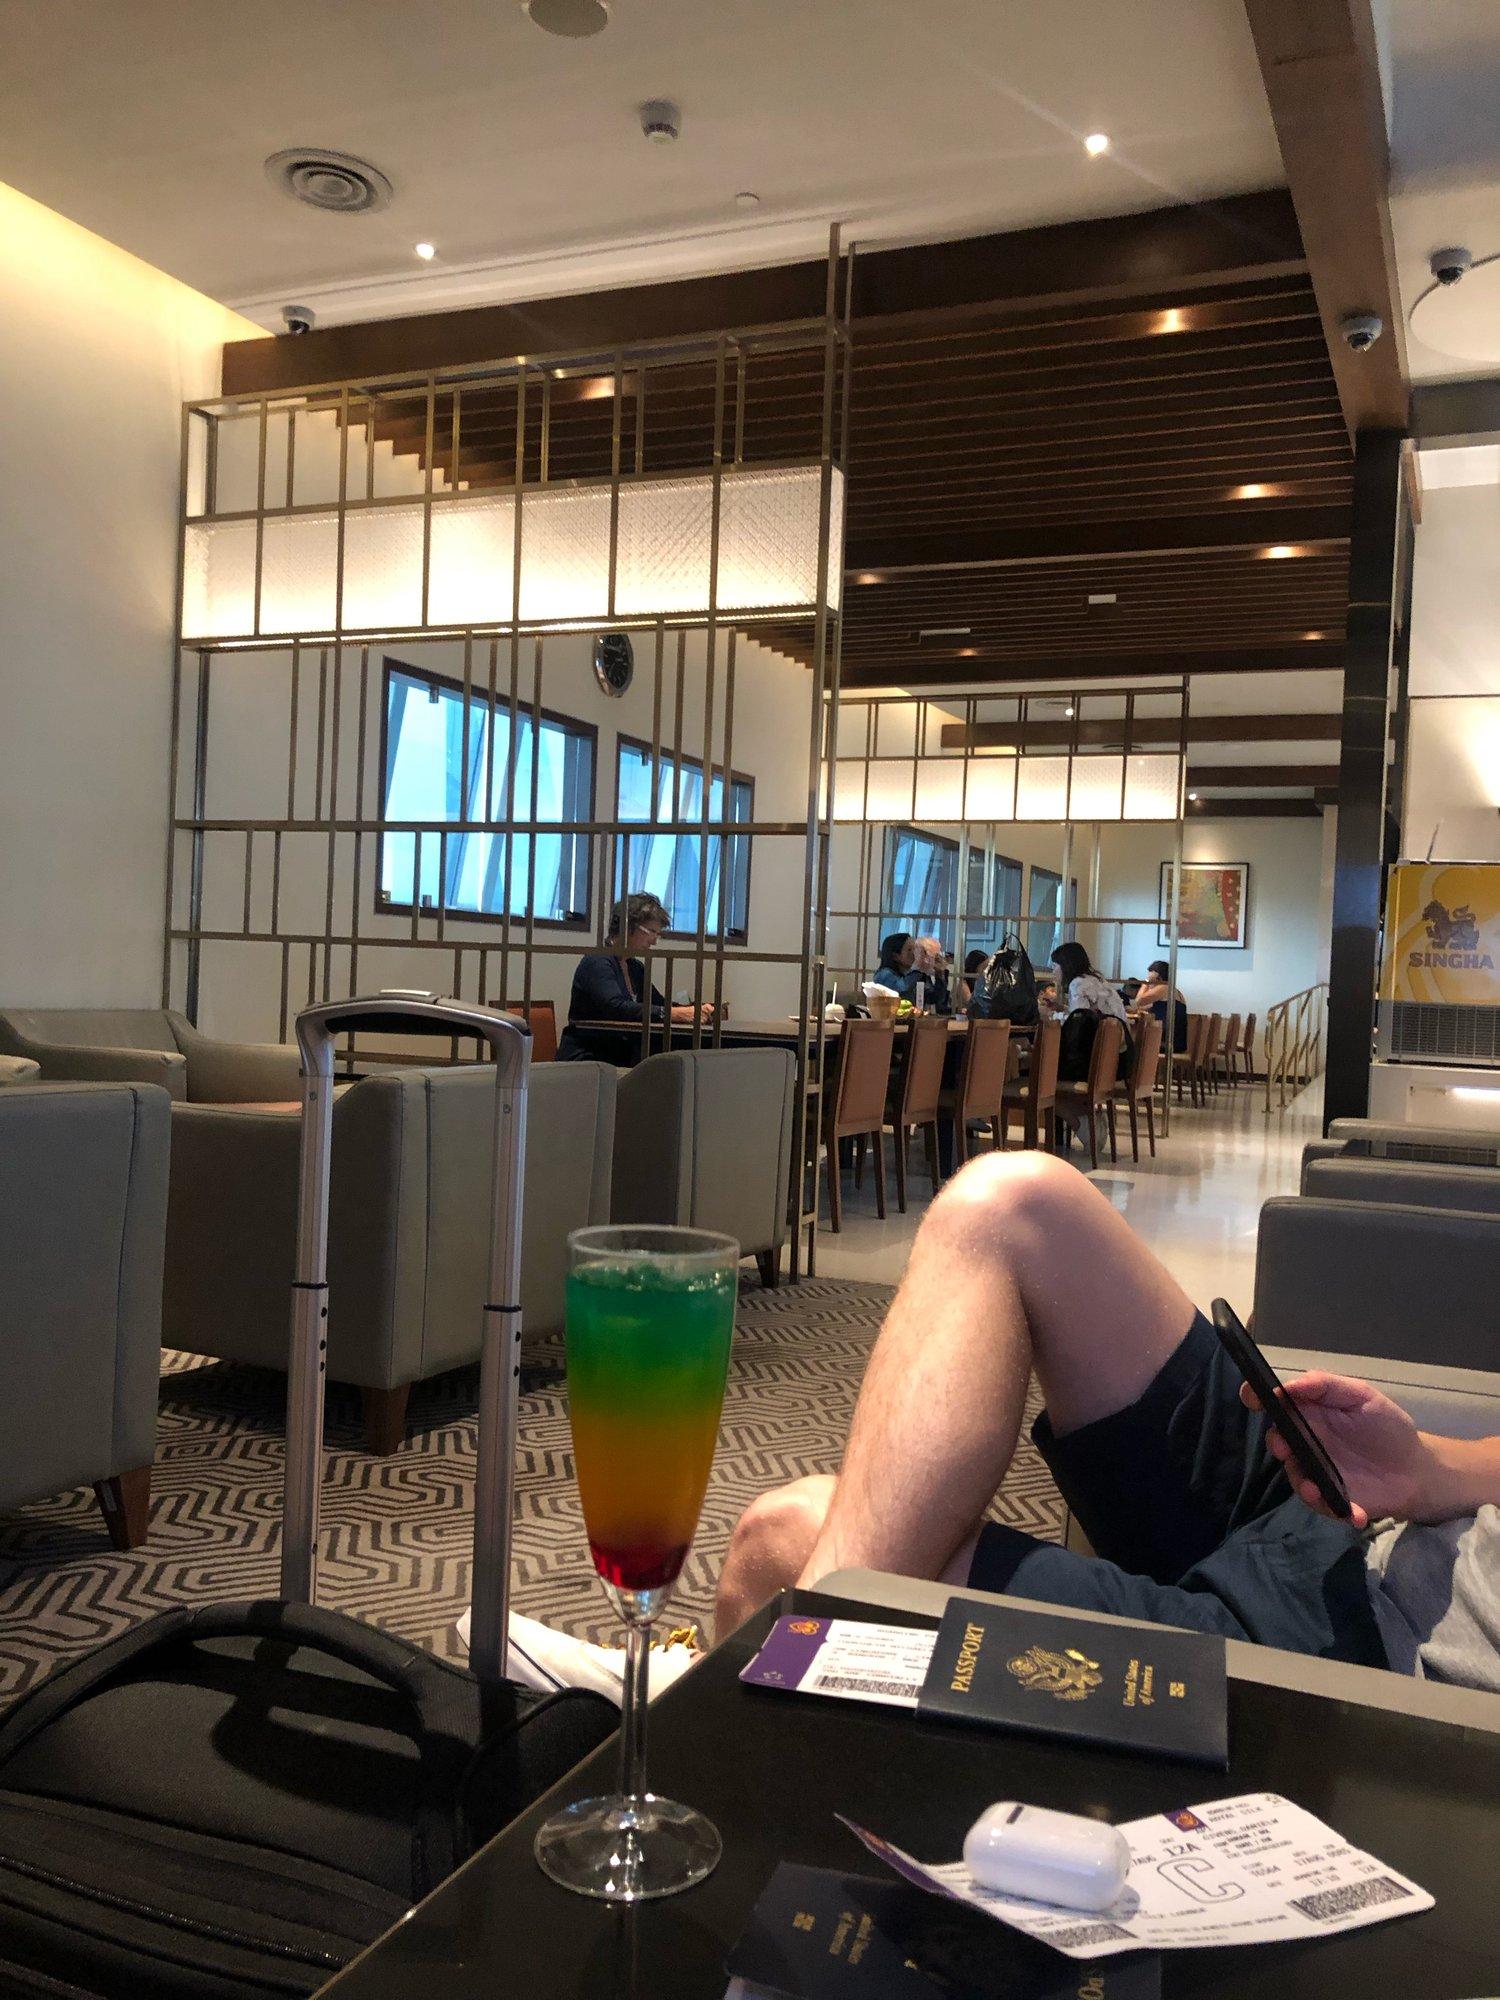 Singapore Airlines SilverKris Business Class Lounge image 13 of 16